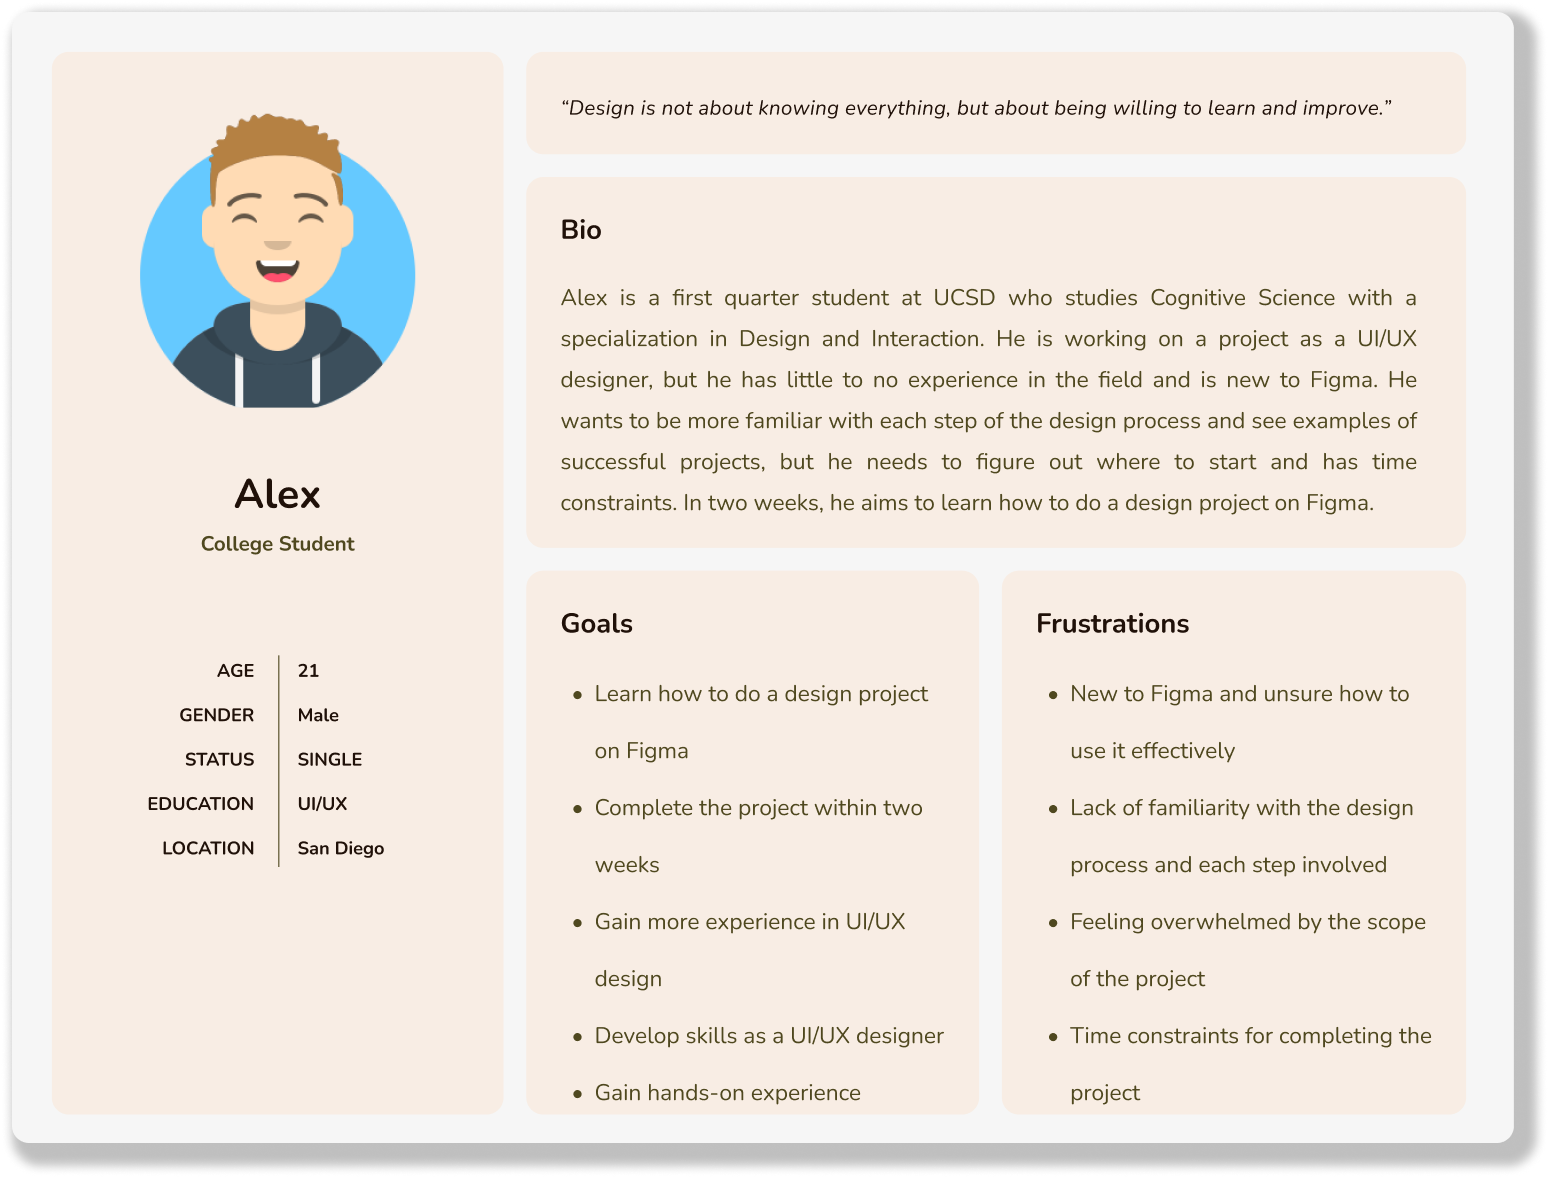 A user persona for the project